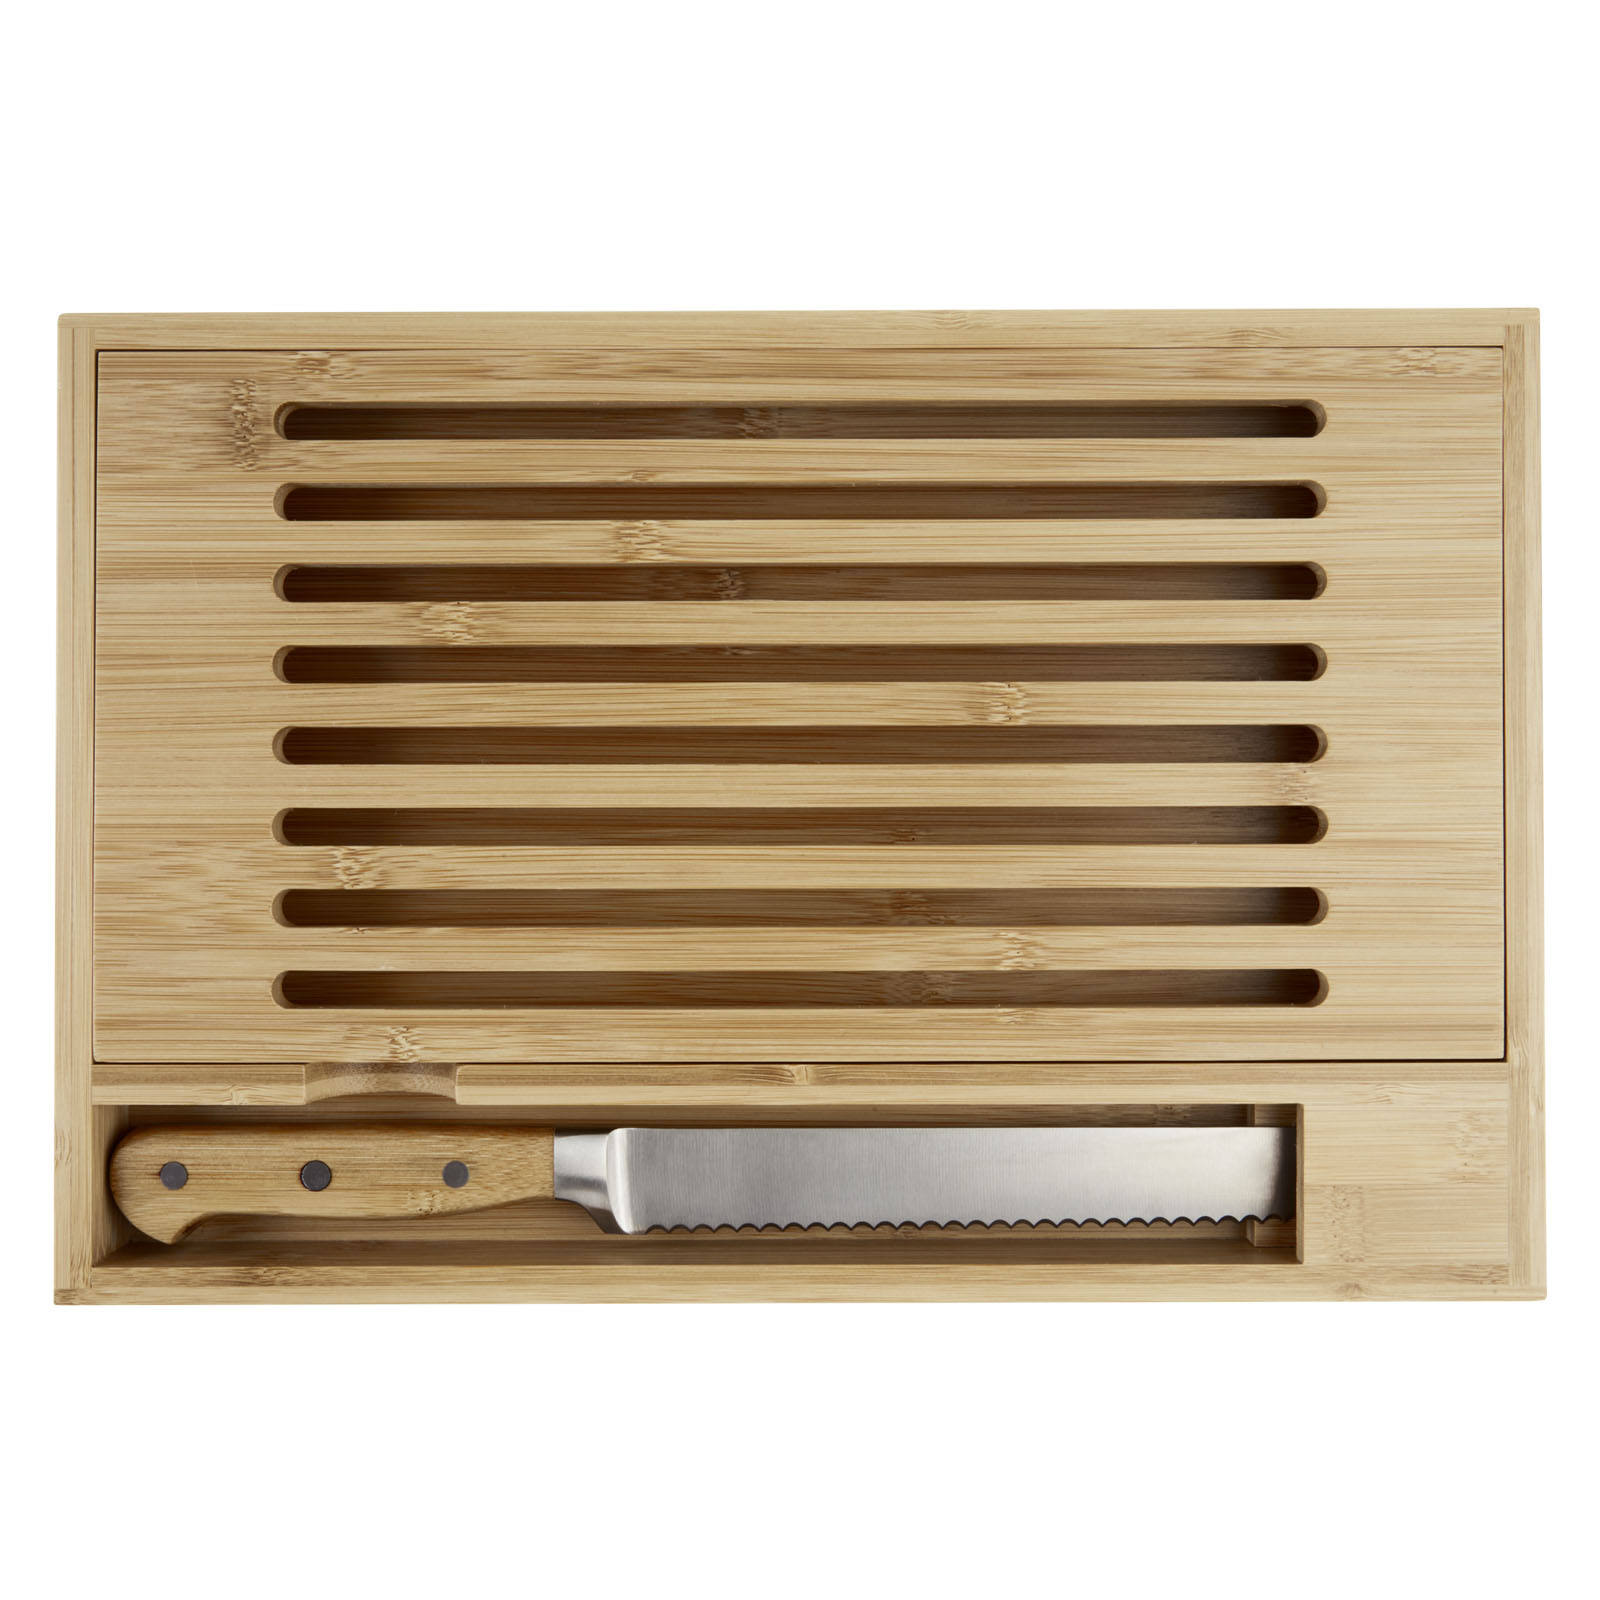 Advertising Cutting Boards - Pao bamboo cutting board with knife - 2